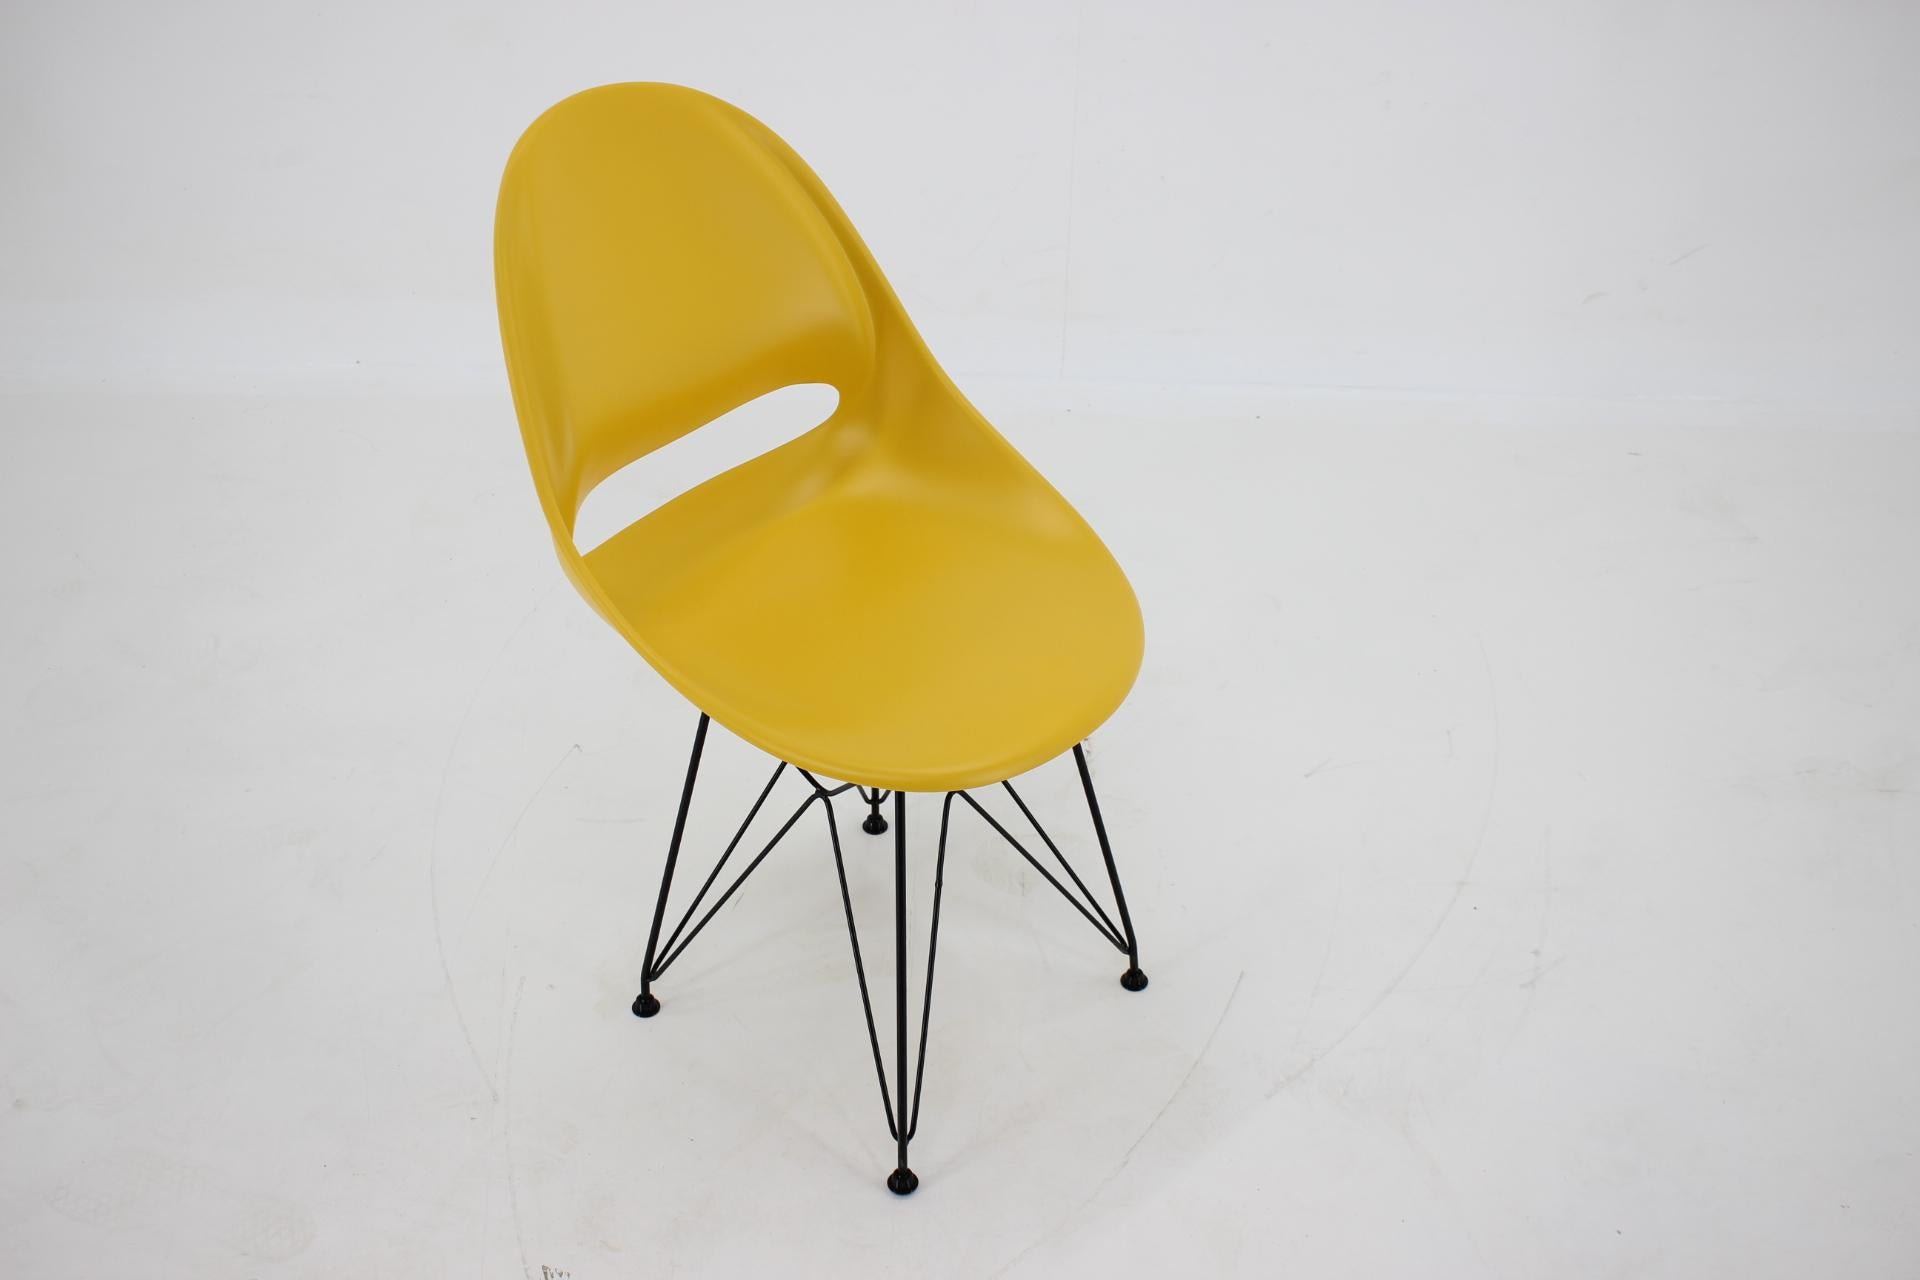 Set of 4 Midcentury Yellow Design Fiberglass Dining Chairs by M.Navratil, 1960s For Sale 6